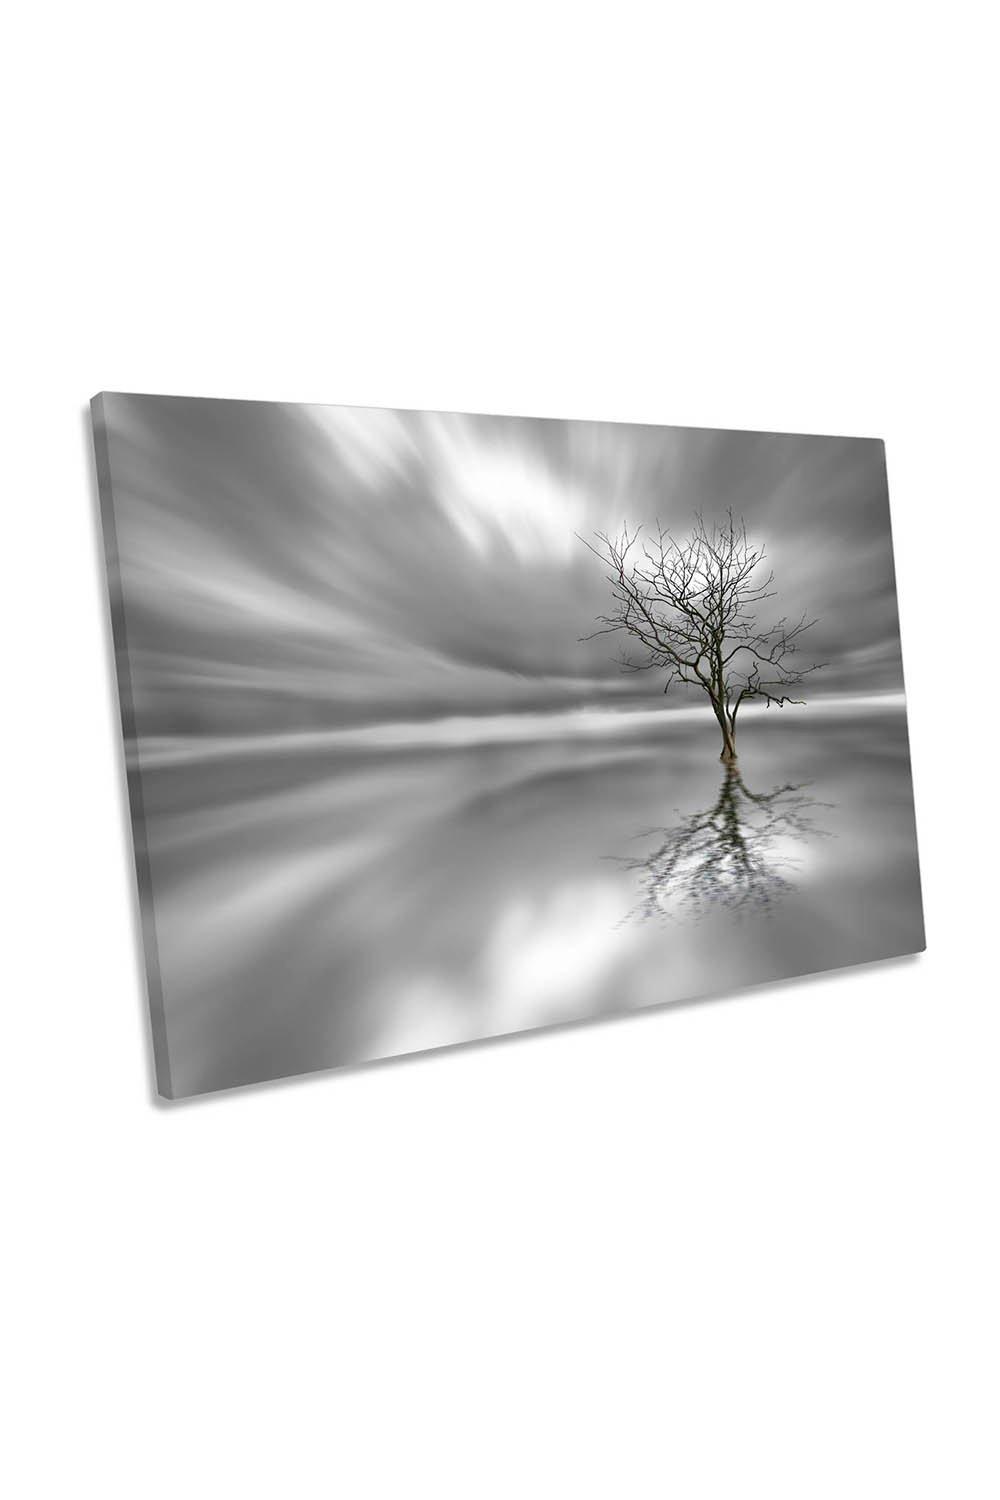 Ghost Tree Reflection Grey Canvas Wall Art Picture Print